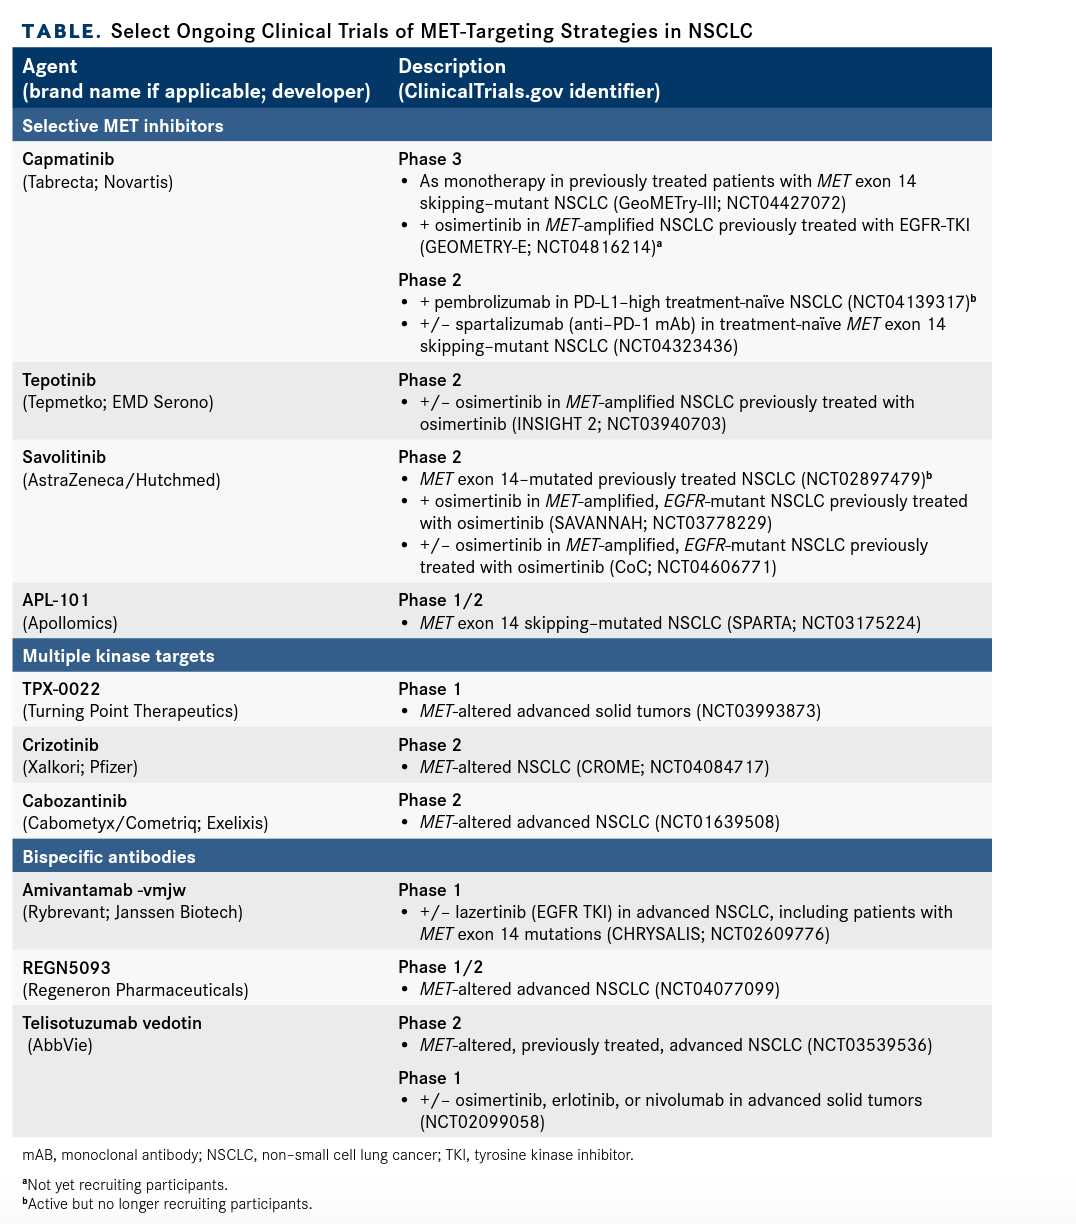 TABLE. Select Ongoing Clinical Trials of MET-Targeting Strategies in NSCLC